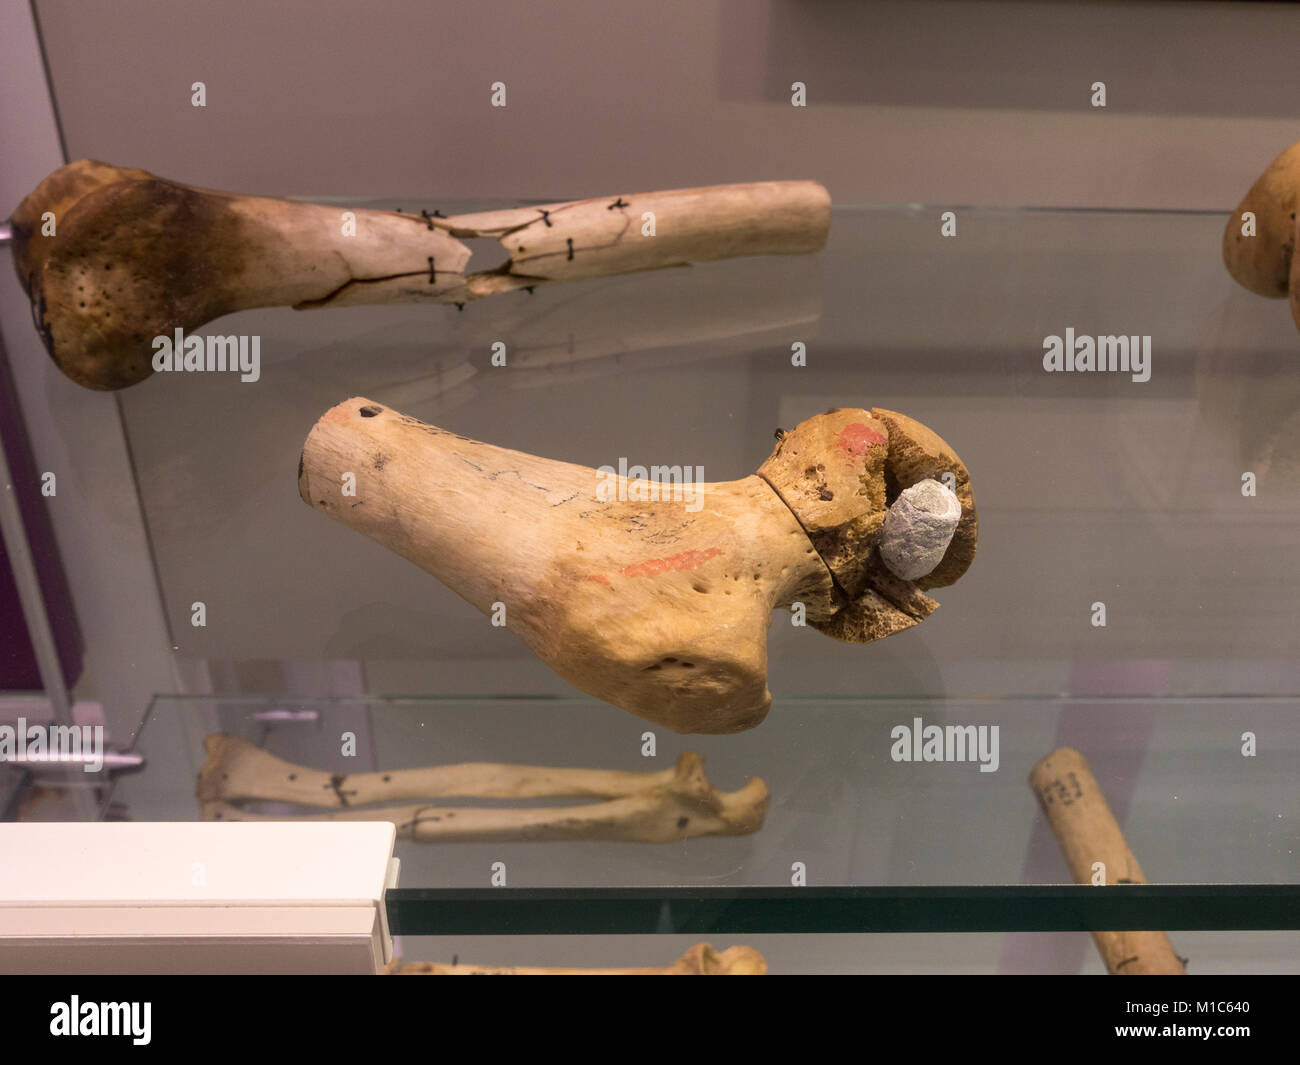 American Civil War human femur joint with the remains of a bullet on display in the National Museum of Health and Medicine, Silver Spring, MD, USA. Stock Photo